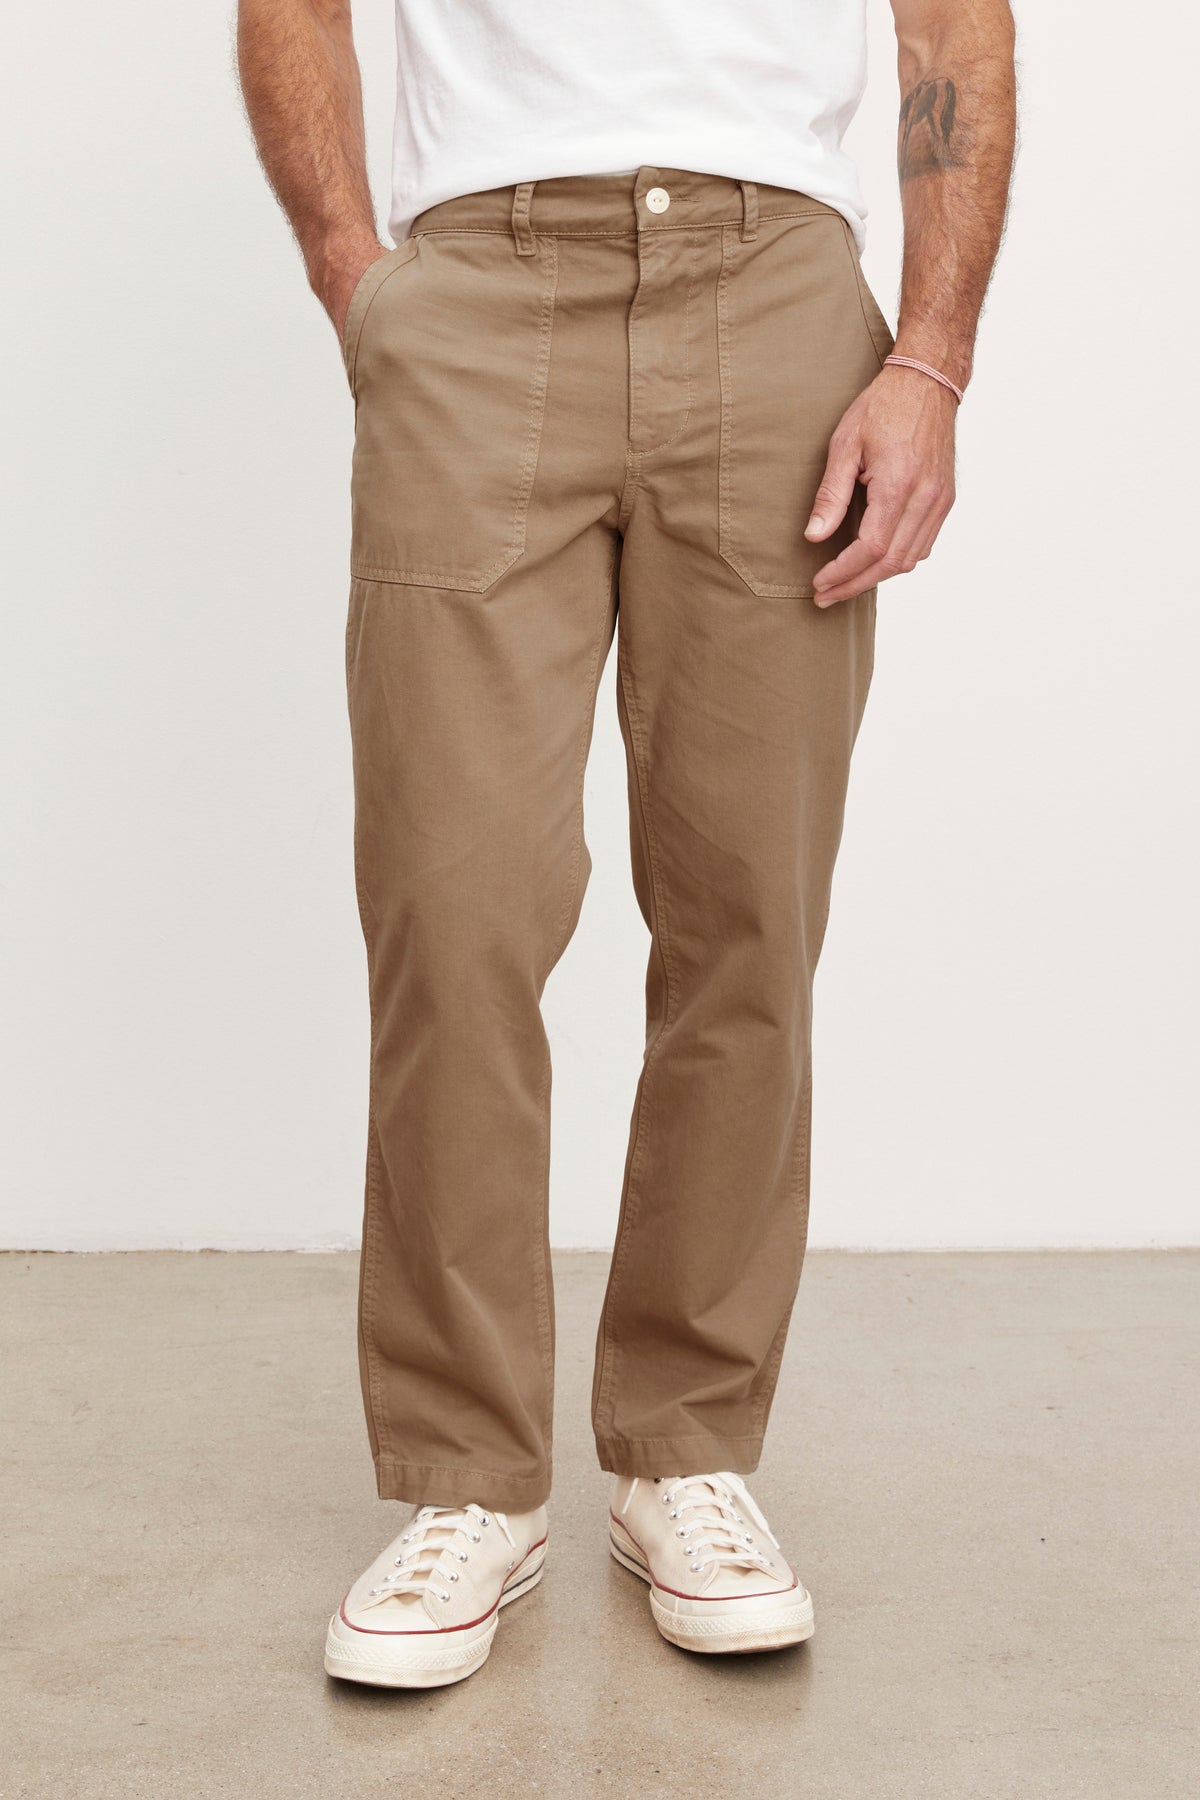 A man wearing Velvet by Graham & Spencer TOBY SANDED TWILL PANT and white sneakers.-36212328300737